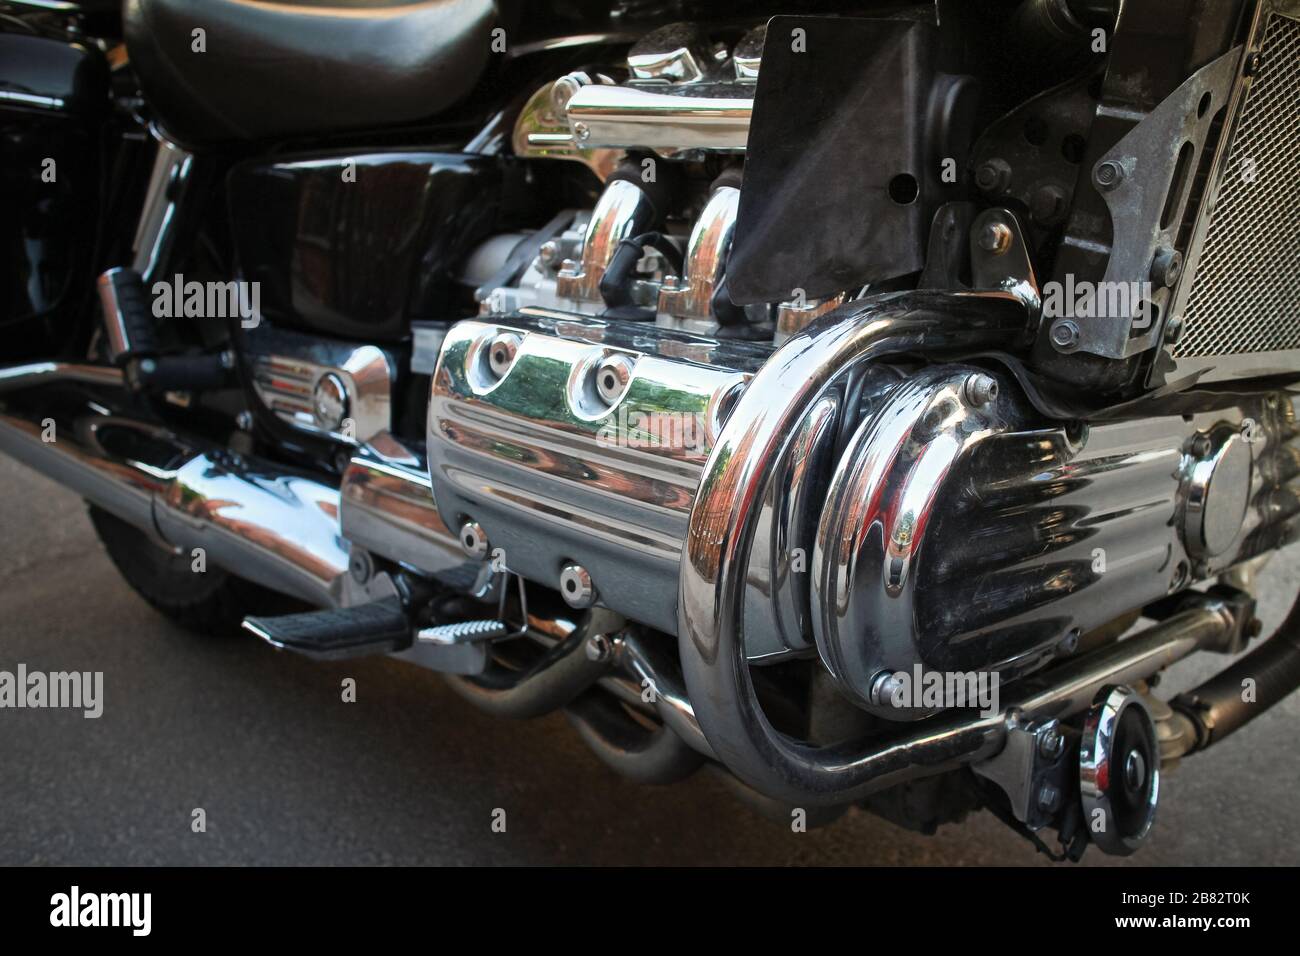 Close-up of a six-cylinder internal combustion engine of a motorcycle Stock Photo